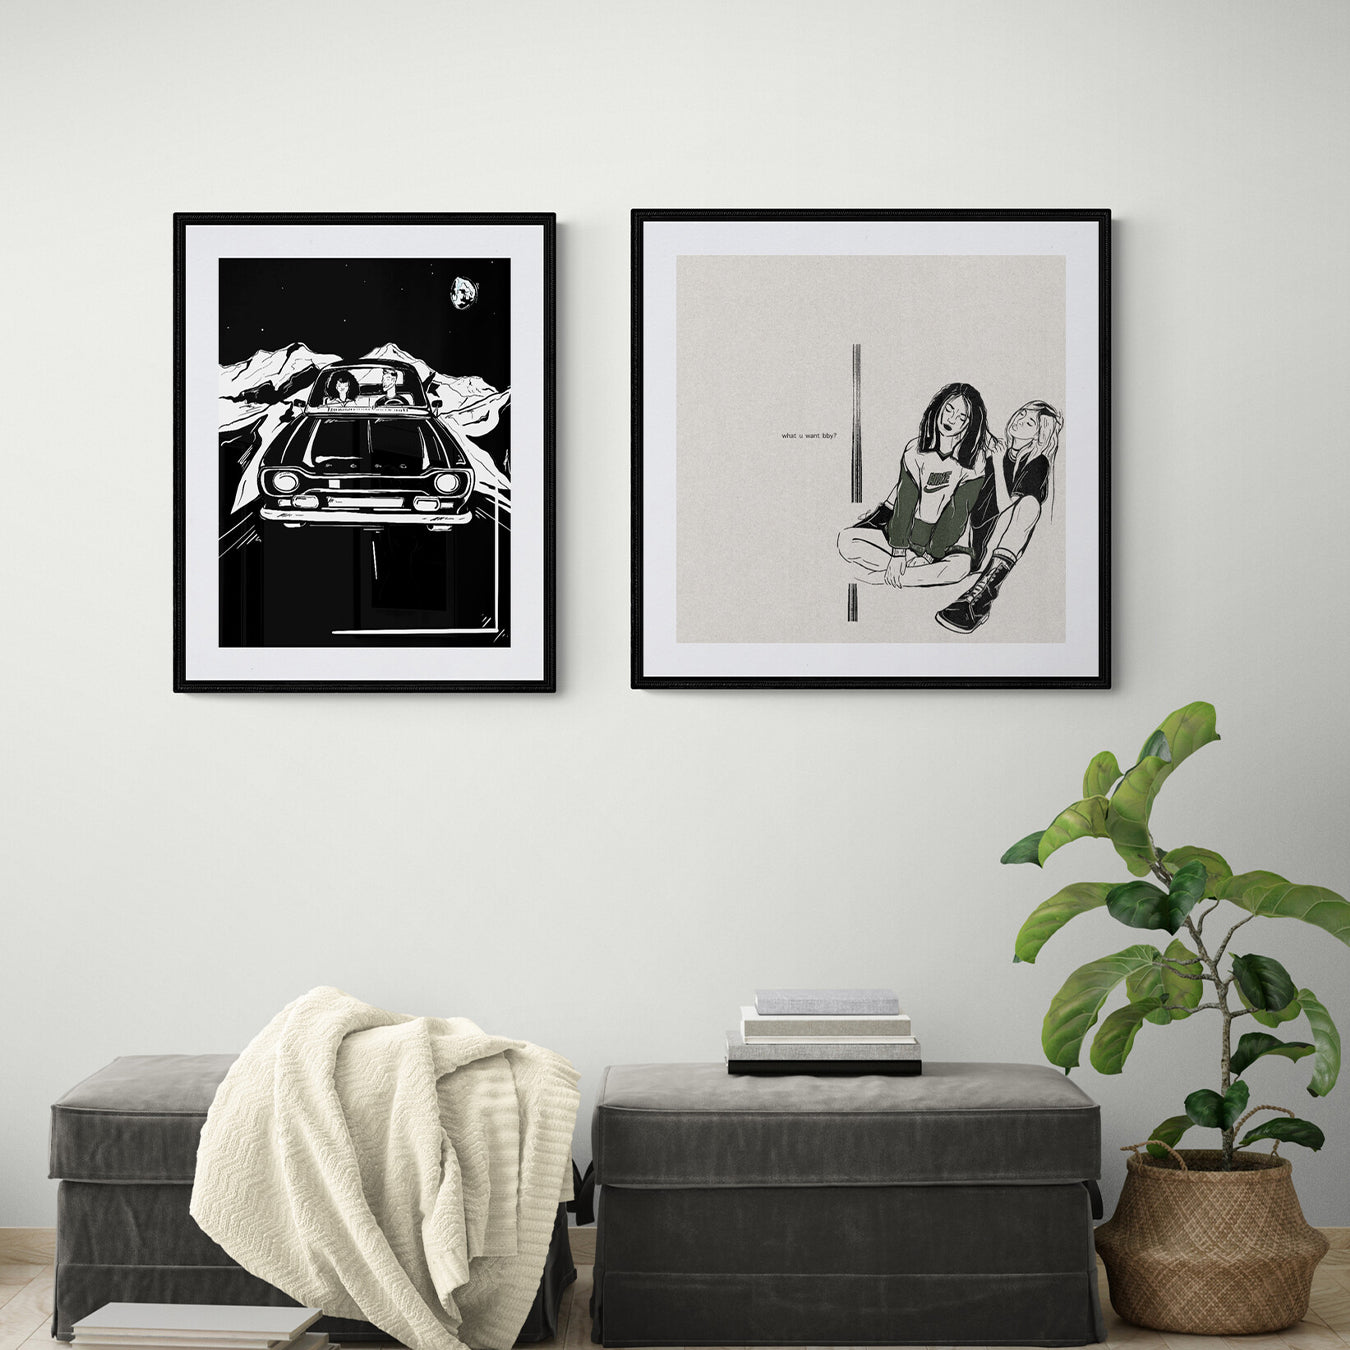 Courtney L Ellis Illustrations Art print by LGBTQ+ Illustration Artist Courtney Ellis. Wall art home decor and gifts. Drawing of a lesbian couple romantic girl playing with the other girls hair asking her "What do you want baby?" black and white artwork.